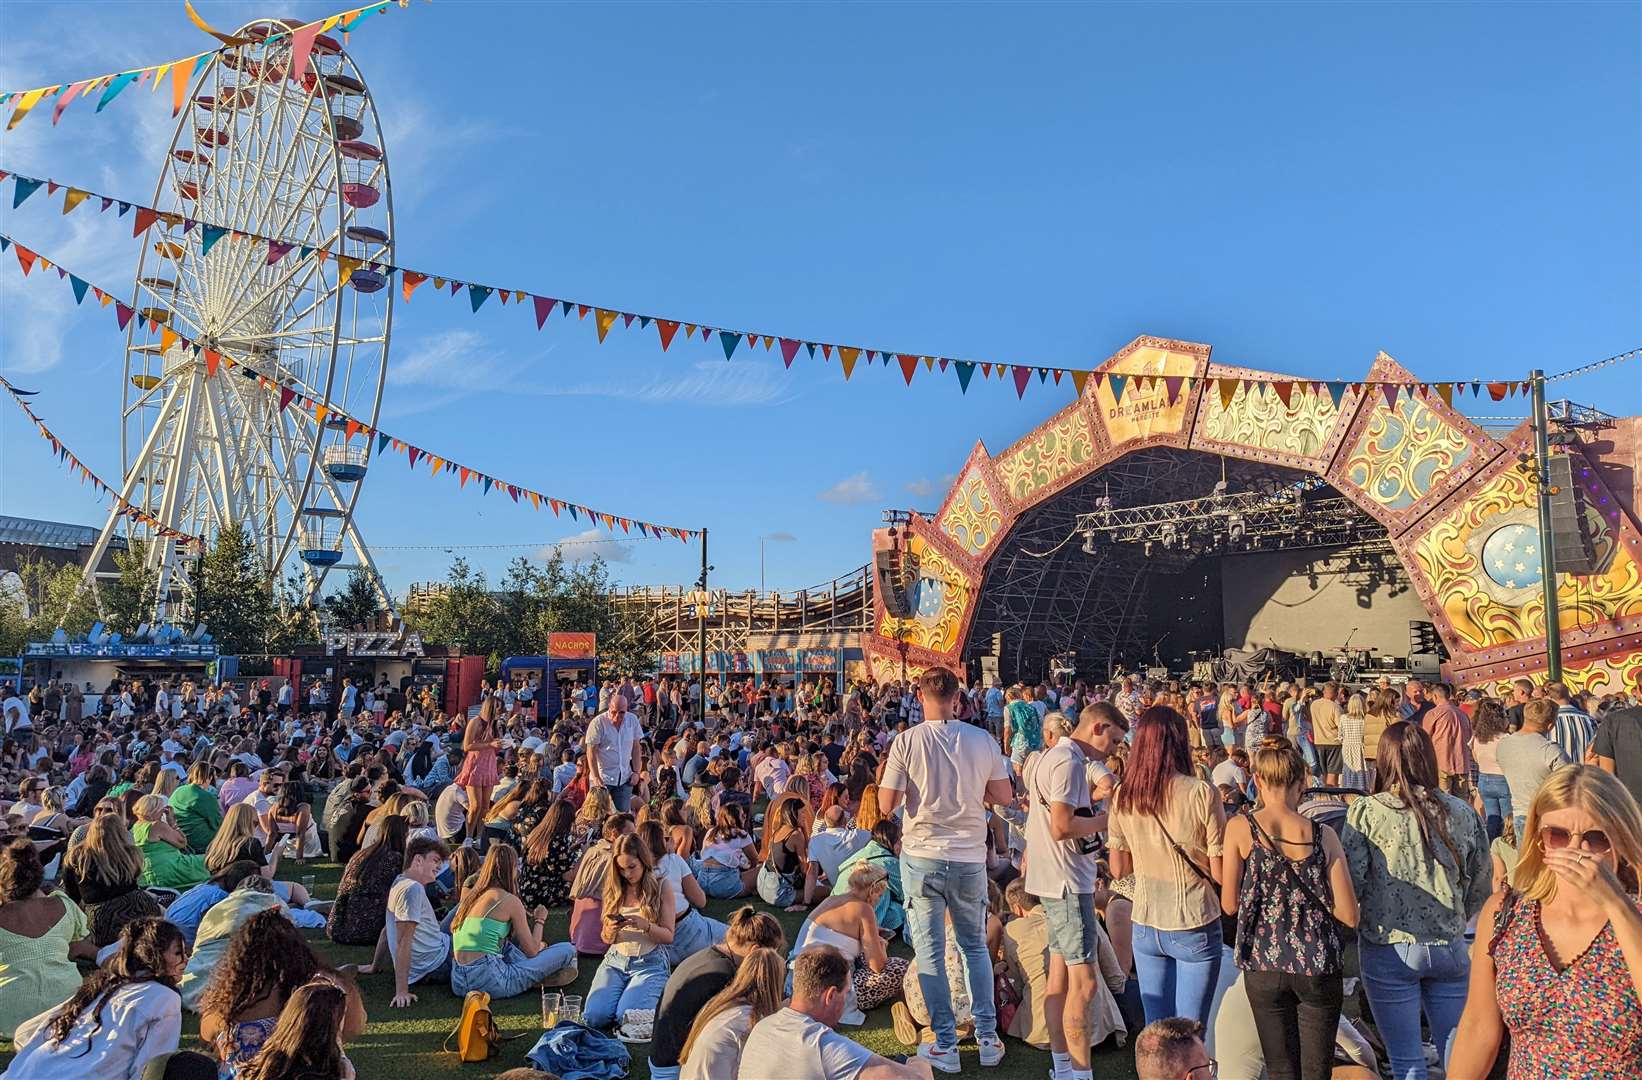 Electronic artists Leftfield and Orbital will also headline the outdoor stage as part of the Margate Summer Series. Picture: Dreamland